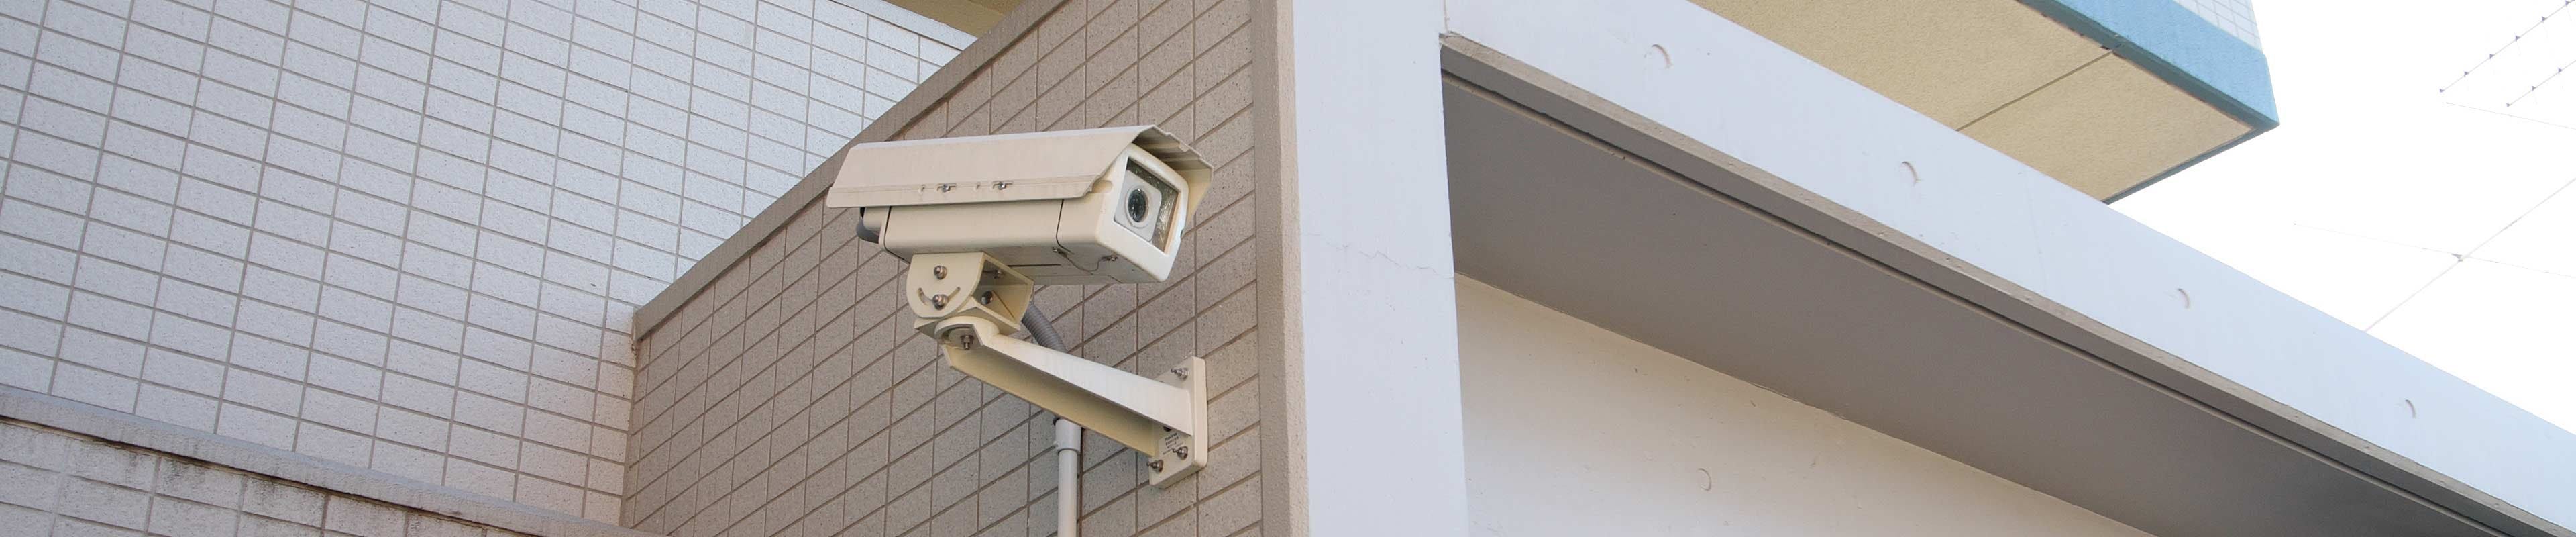 security camera on the outside of a building